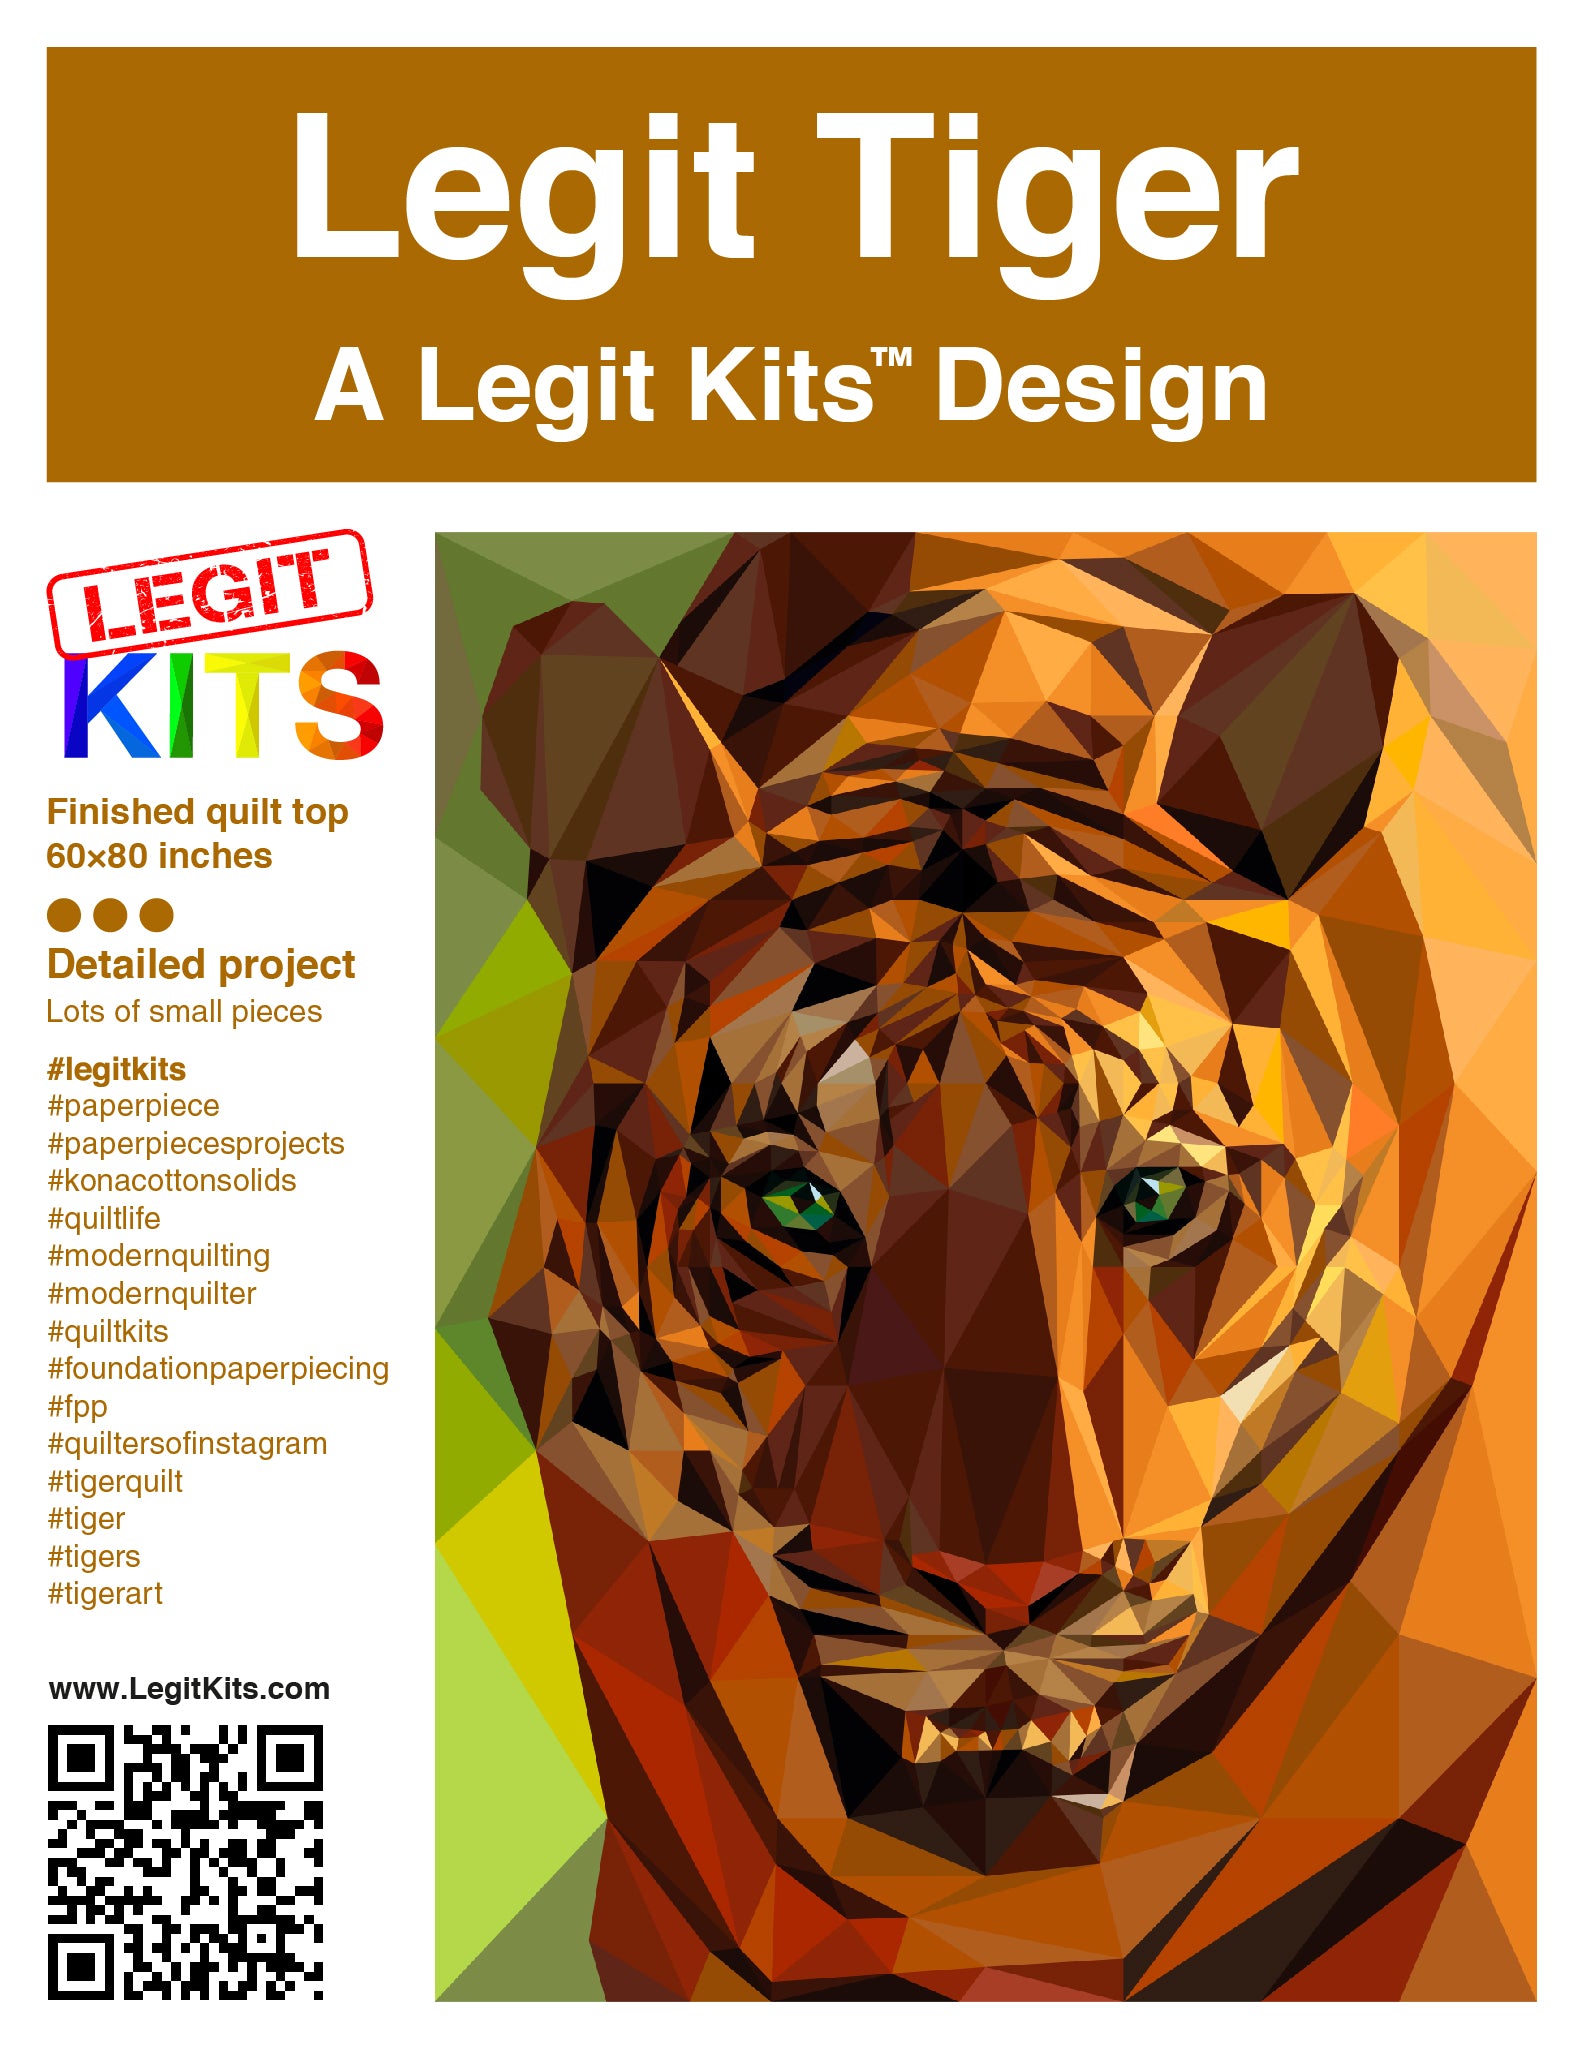 Legit Tiger, a 60 by 80 inch quilt designed by Legit Kits.